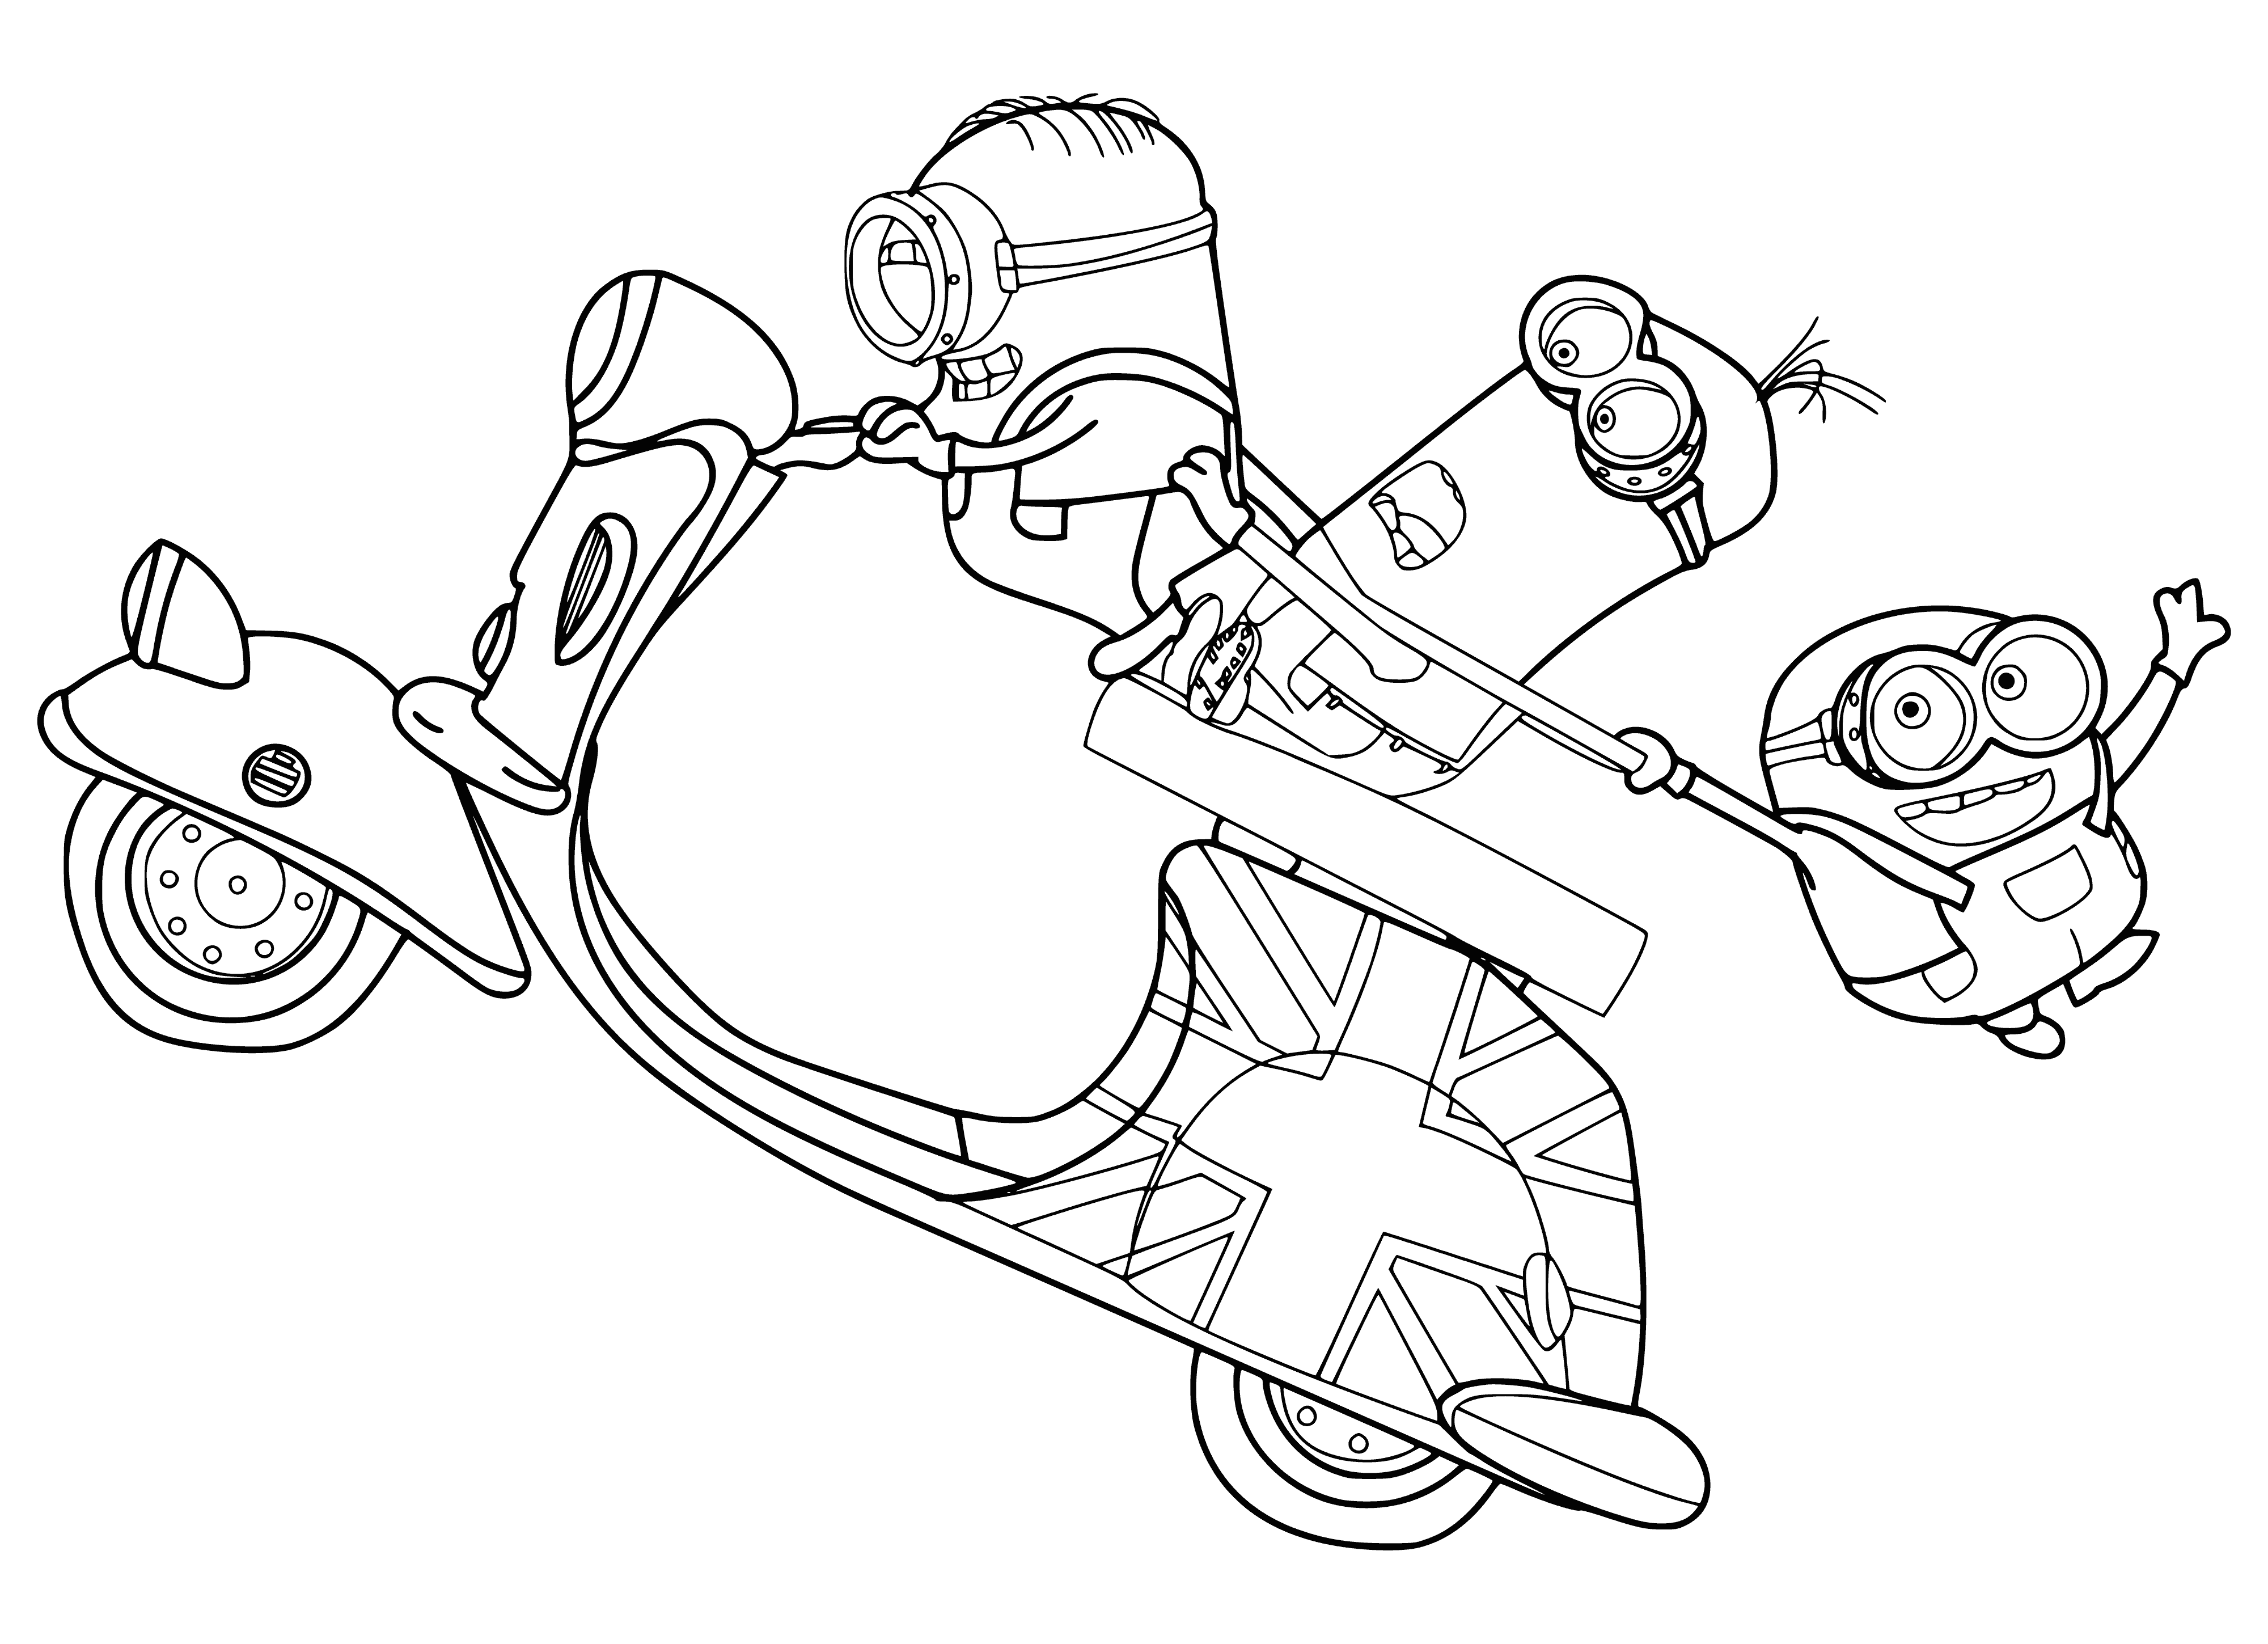 Minions on a motorcycle coloring page